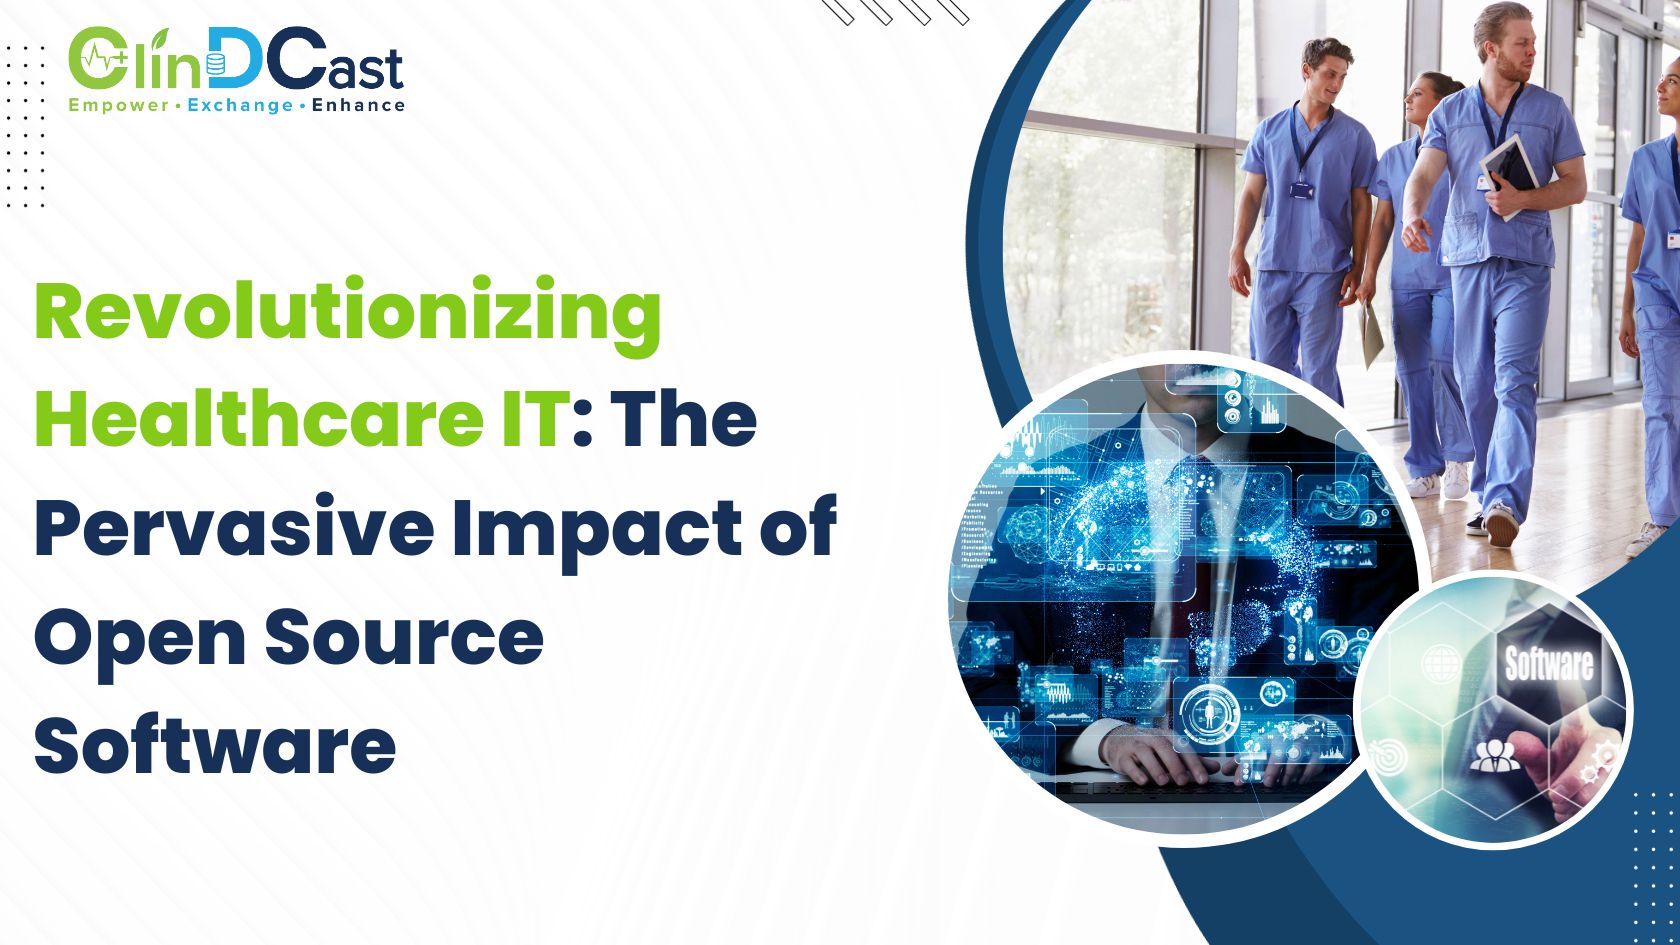 Revolutionizing Healthcare IT: The Pervasive Impact of Open Source Software